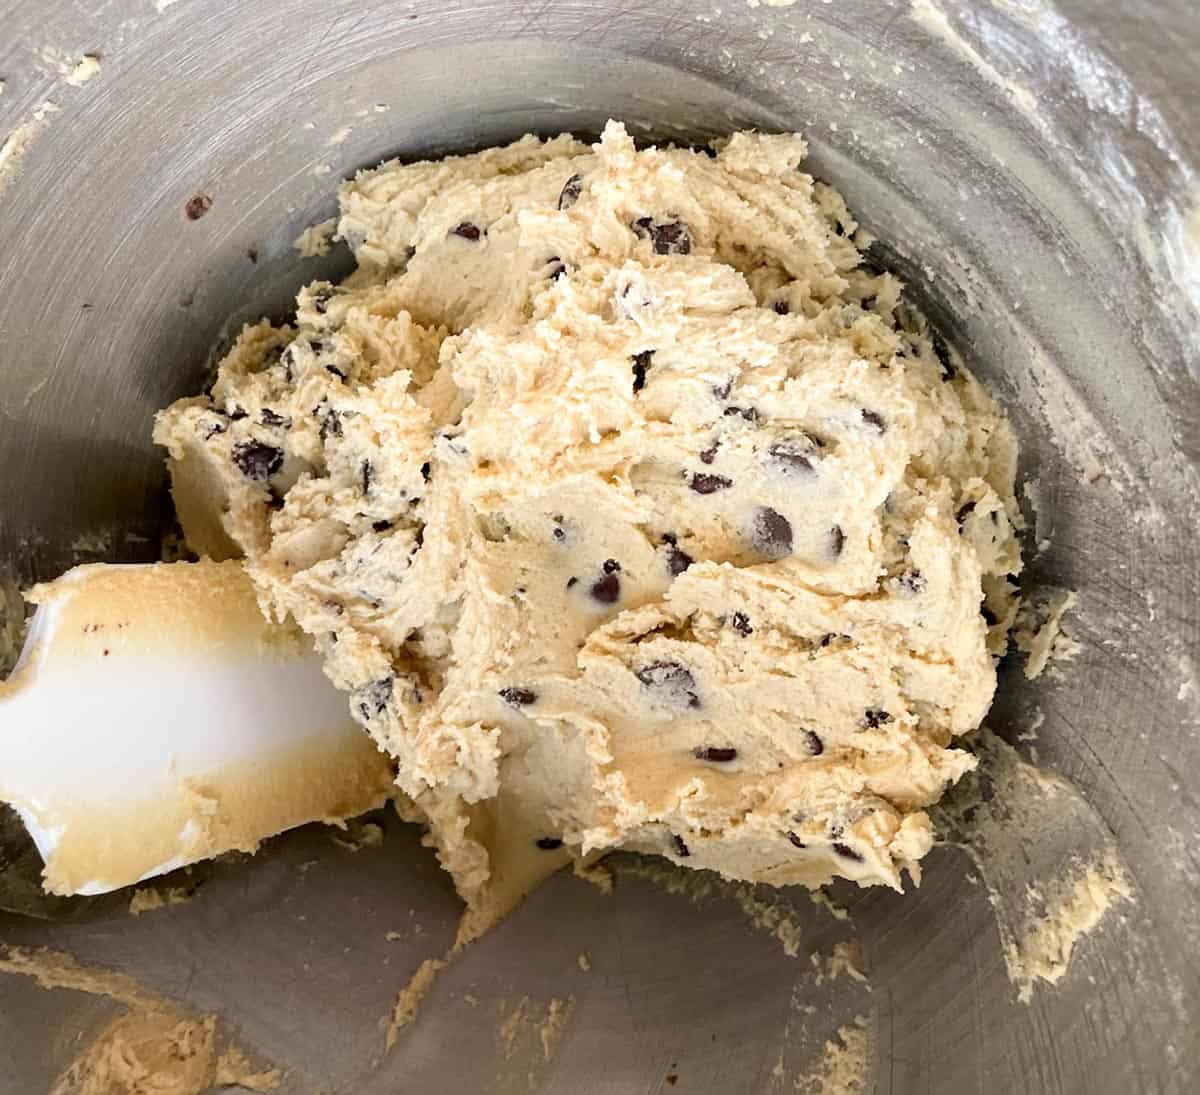 Chocolate Chip cookie dough in the mixer bowl. A perfect light brown color.